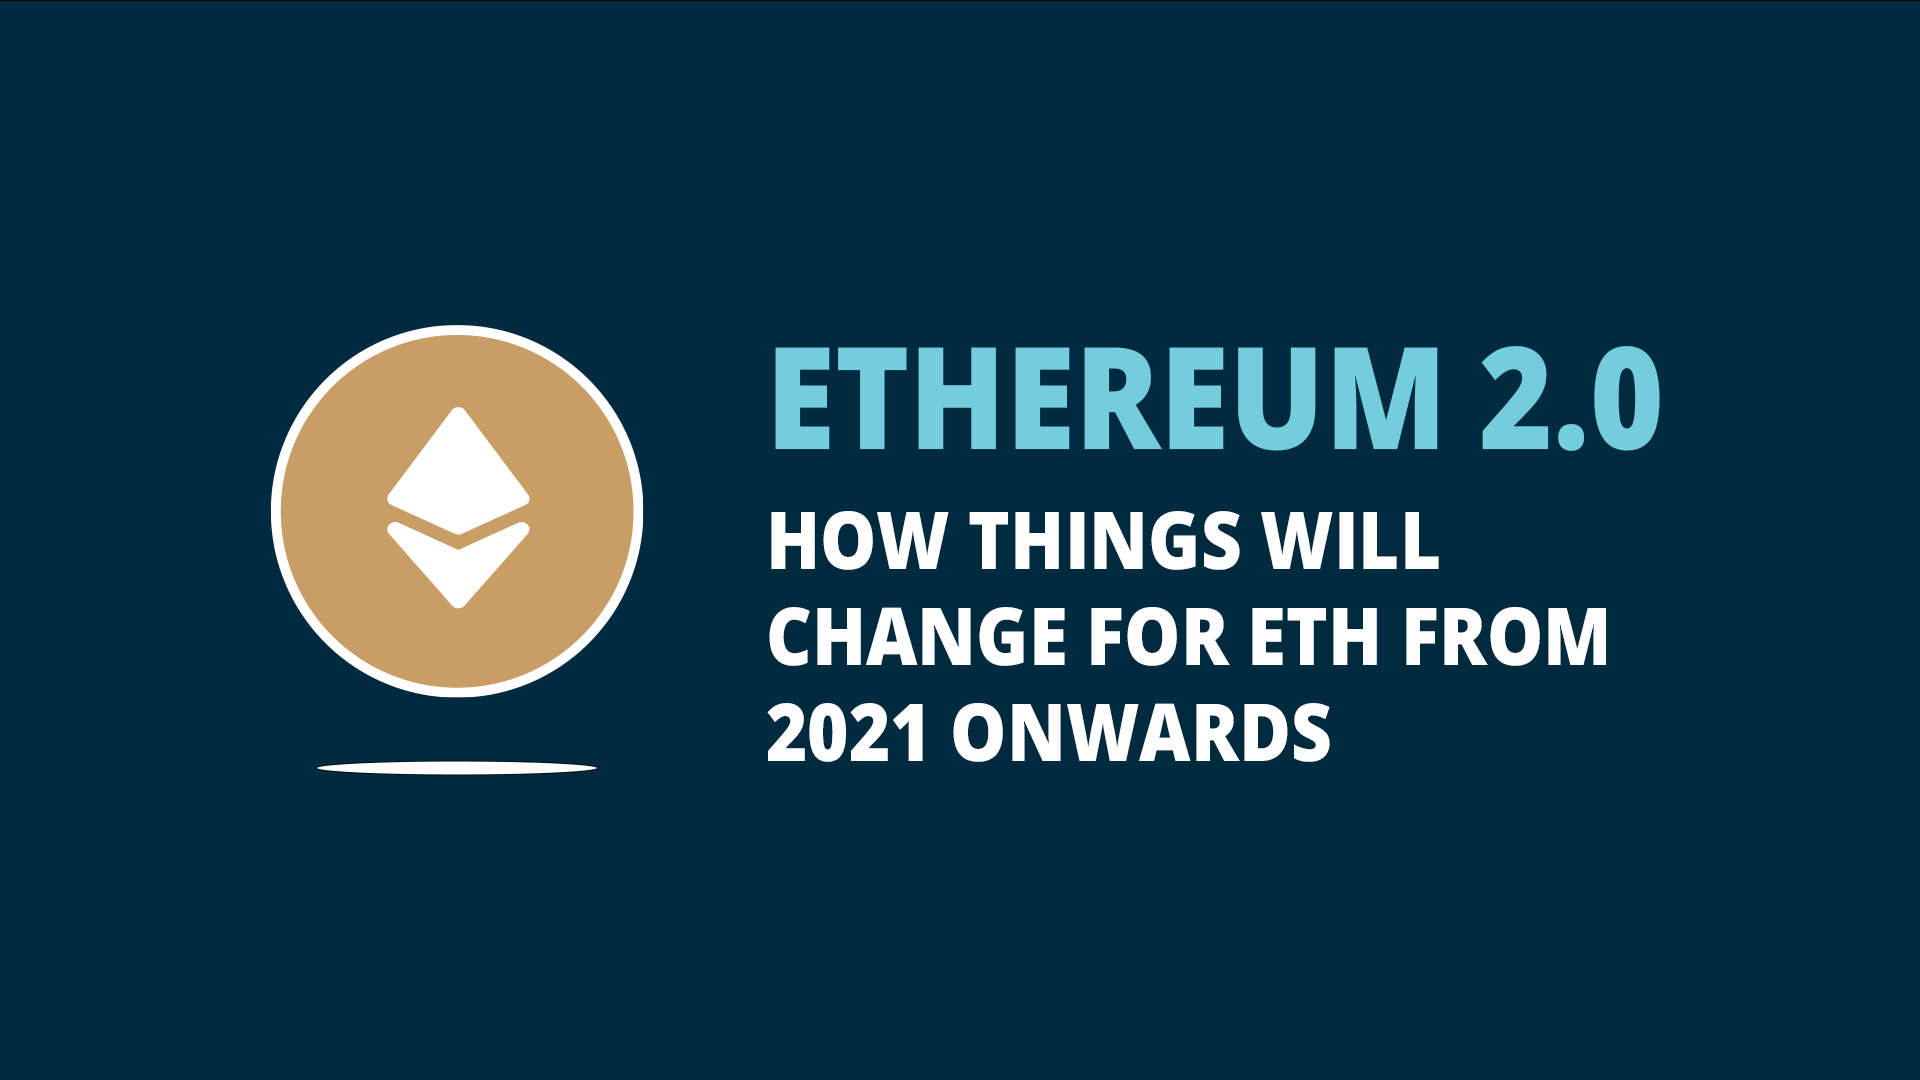 What is Ethereum 2.0?